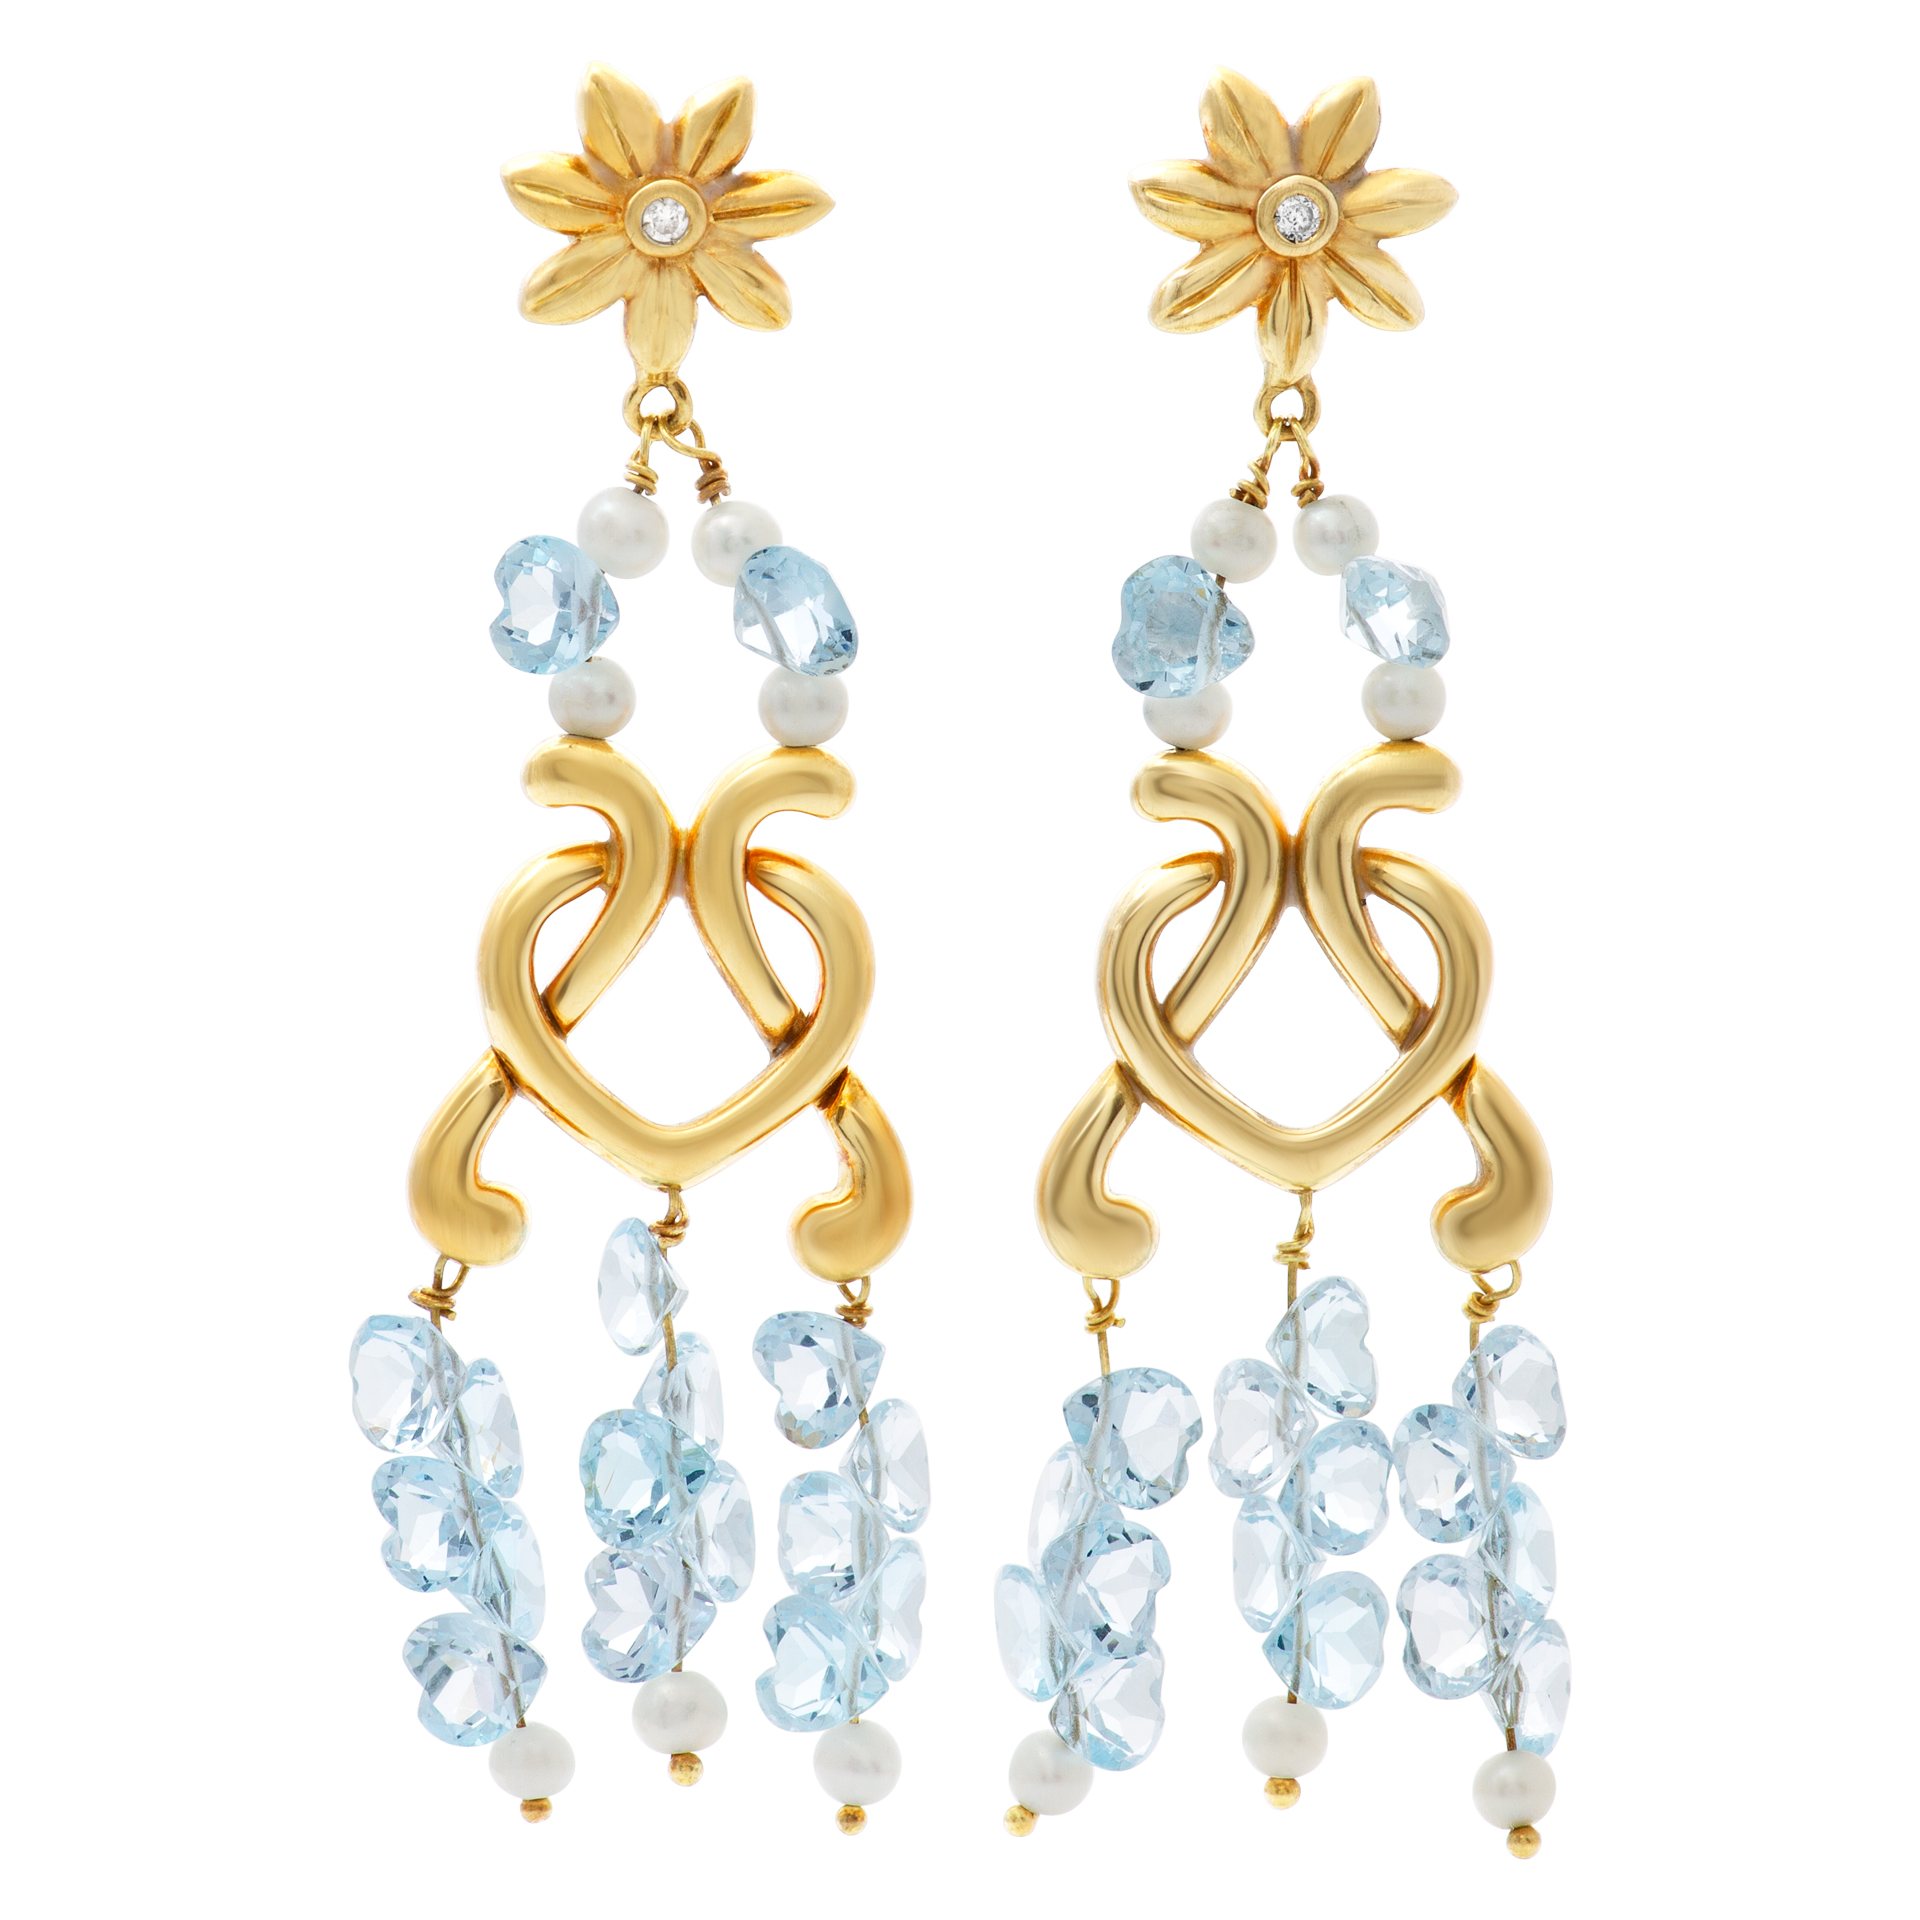 Dangling earrings with heart shape blue topaz, pearls and diamonds set in 18k yelow gold